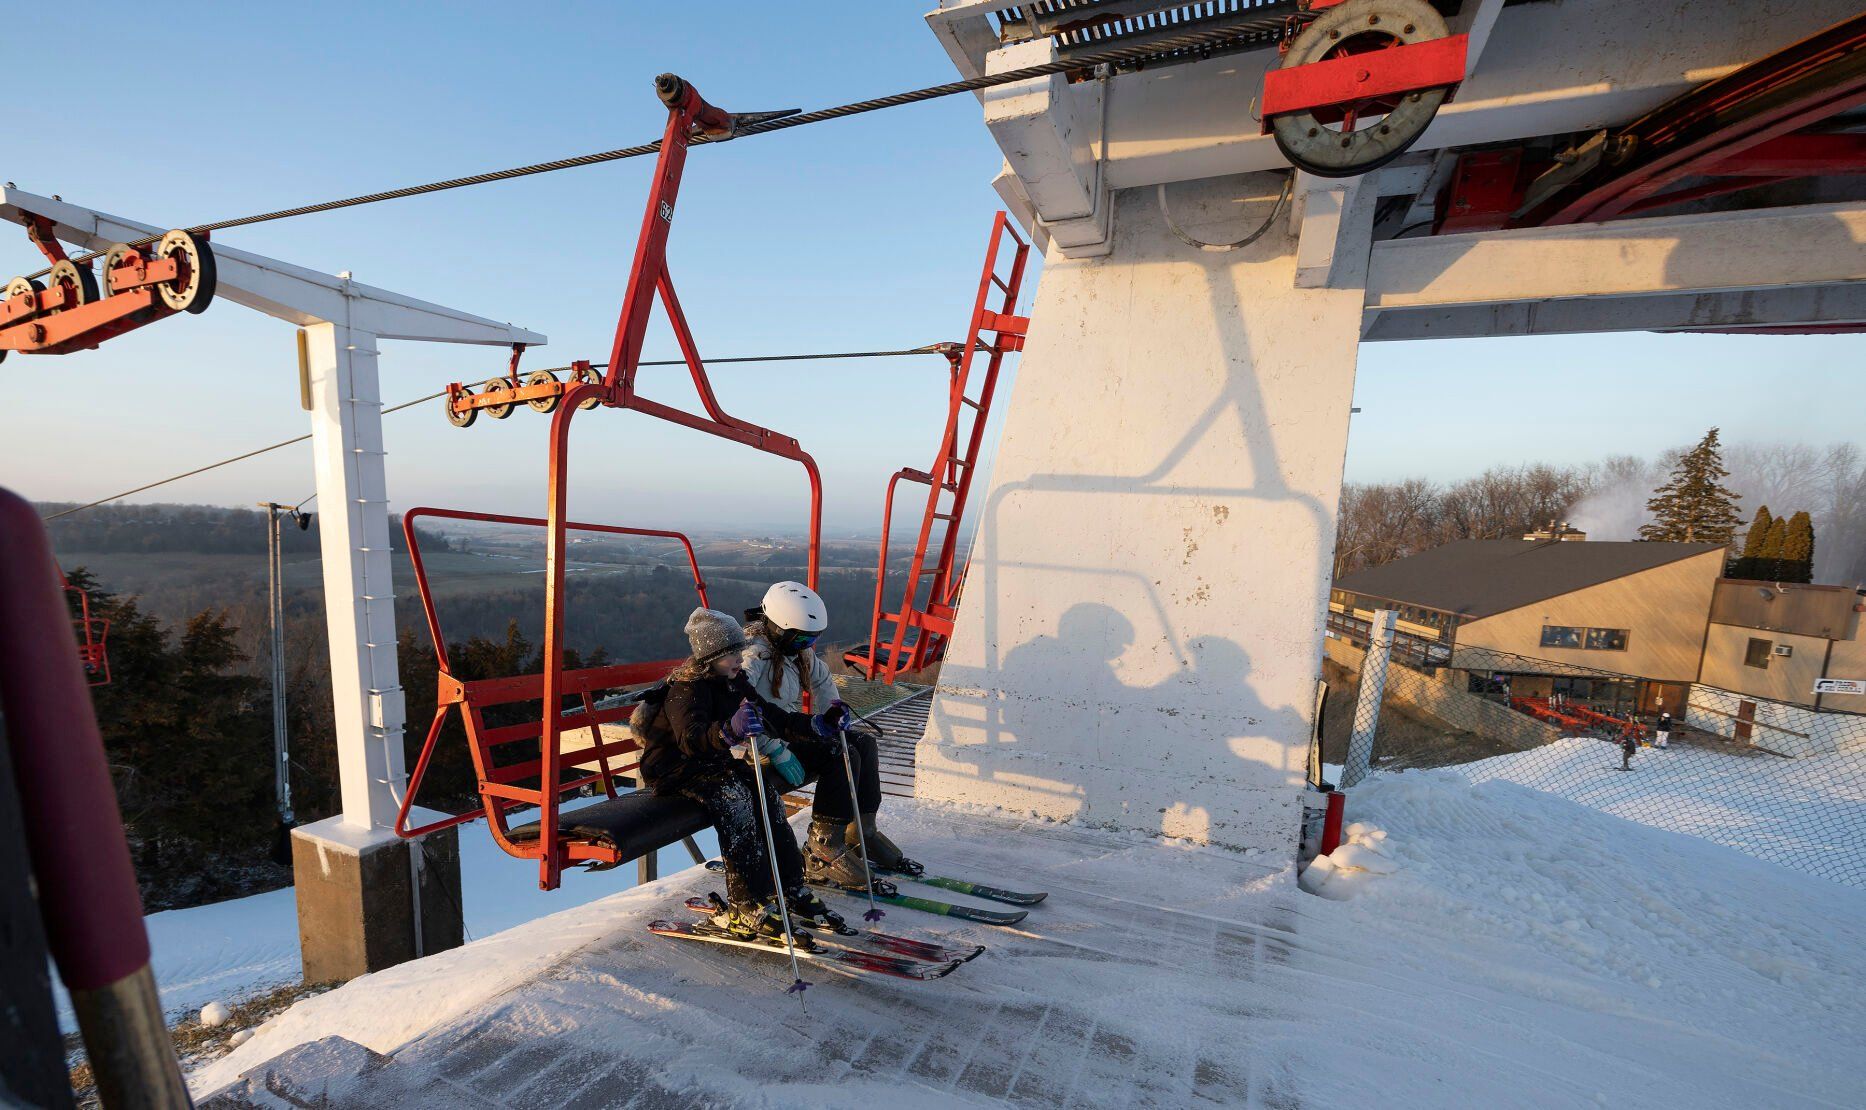 Two young skiers exit the triple chairlift at Sundown Mountain Resort in Dubuque on Friday, Jan. 6, 2023    PHOTO CREDIT: Stephen Gassman